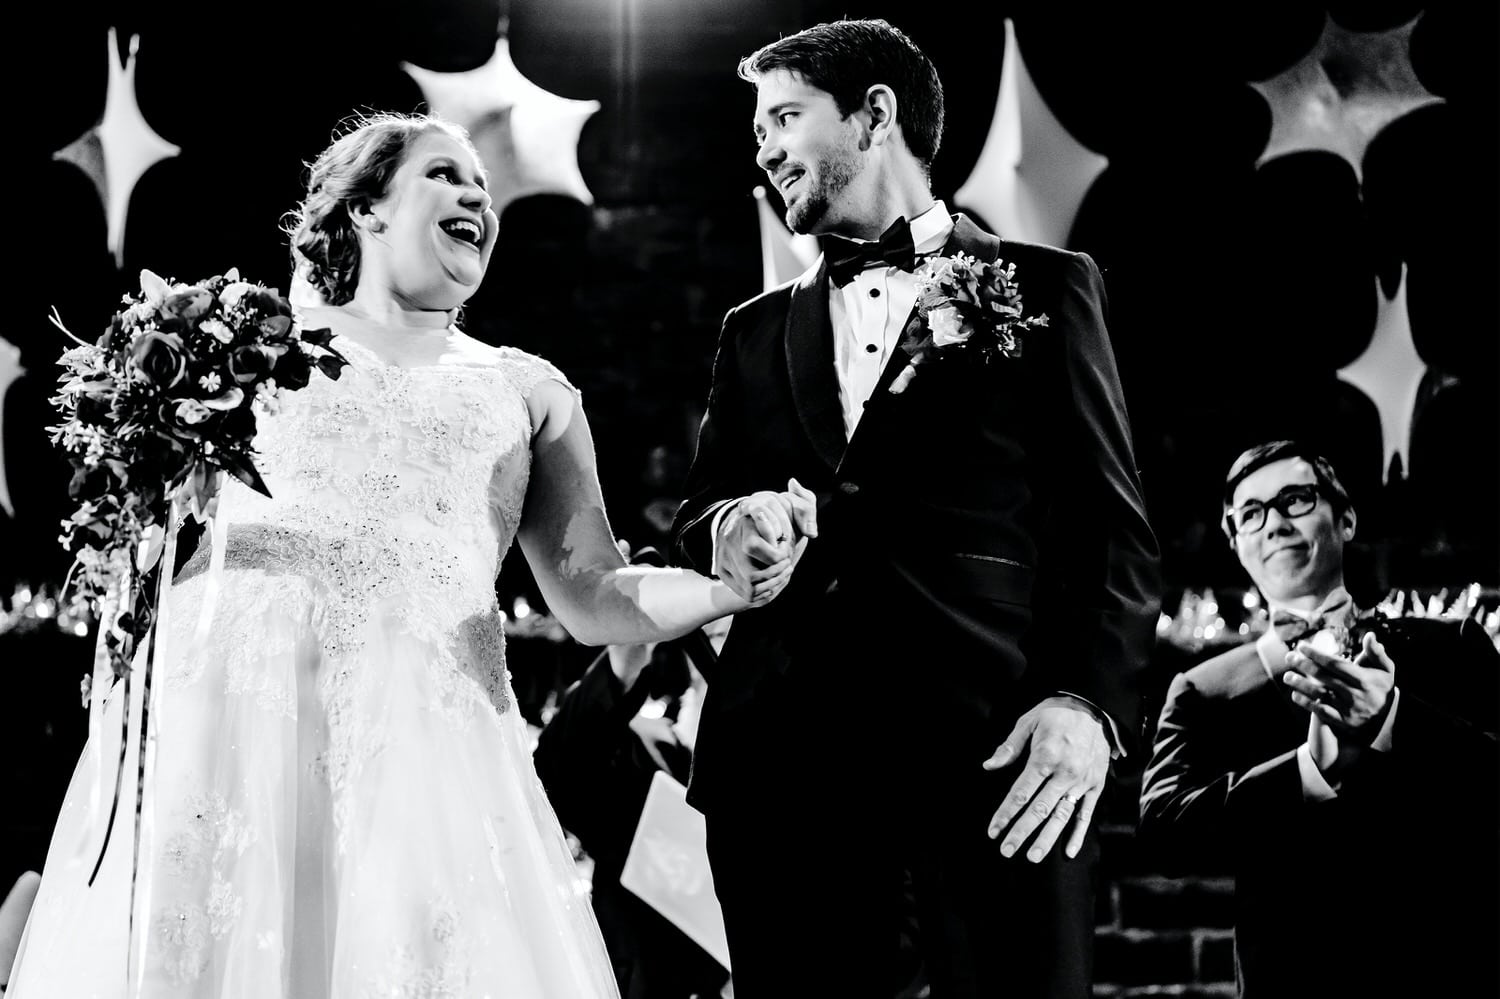 A candid black and white picture of a bride holding a bouquet and a groom's hands as the couple smiles at each other in front of a backdrop of white snowflakes hanging from the ceiling of the Vox theater at the end of a wedding ceremony near Christmas time in Kansas City. 